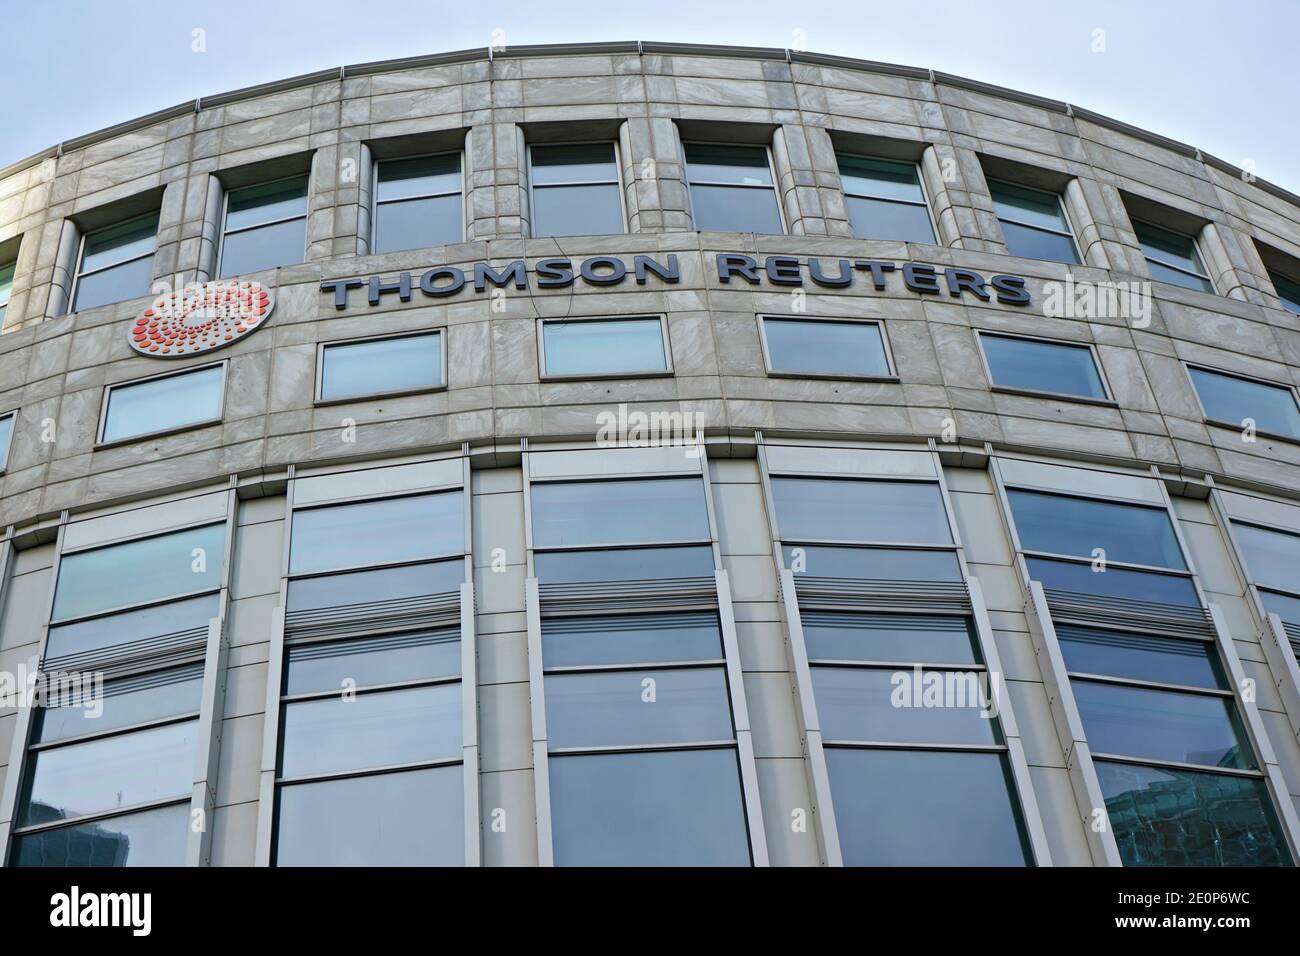 London, United Kingdom - February 03, 2019: Sun shines on Thomson Reuters offices building at Canary Wharf in UK capital. TR Group is Canadian multina Stock Photo